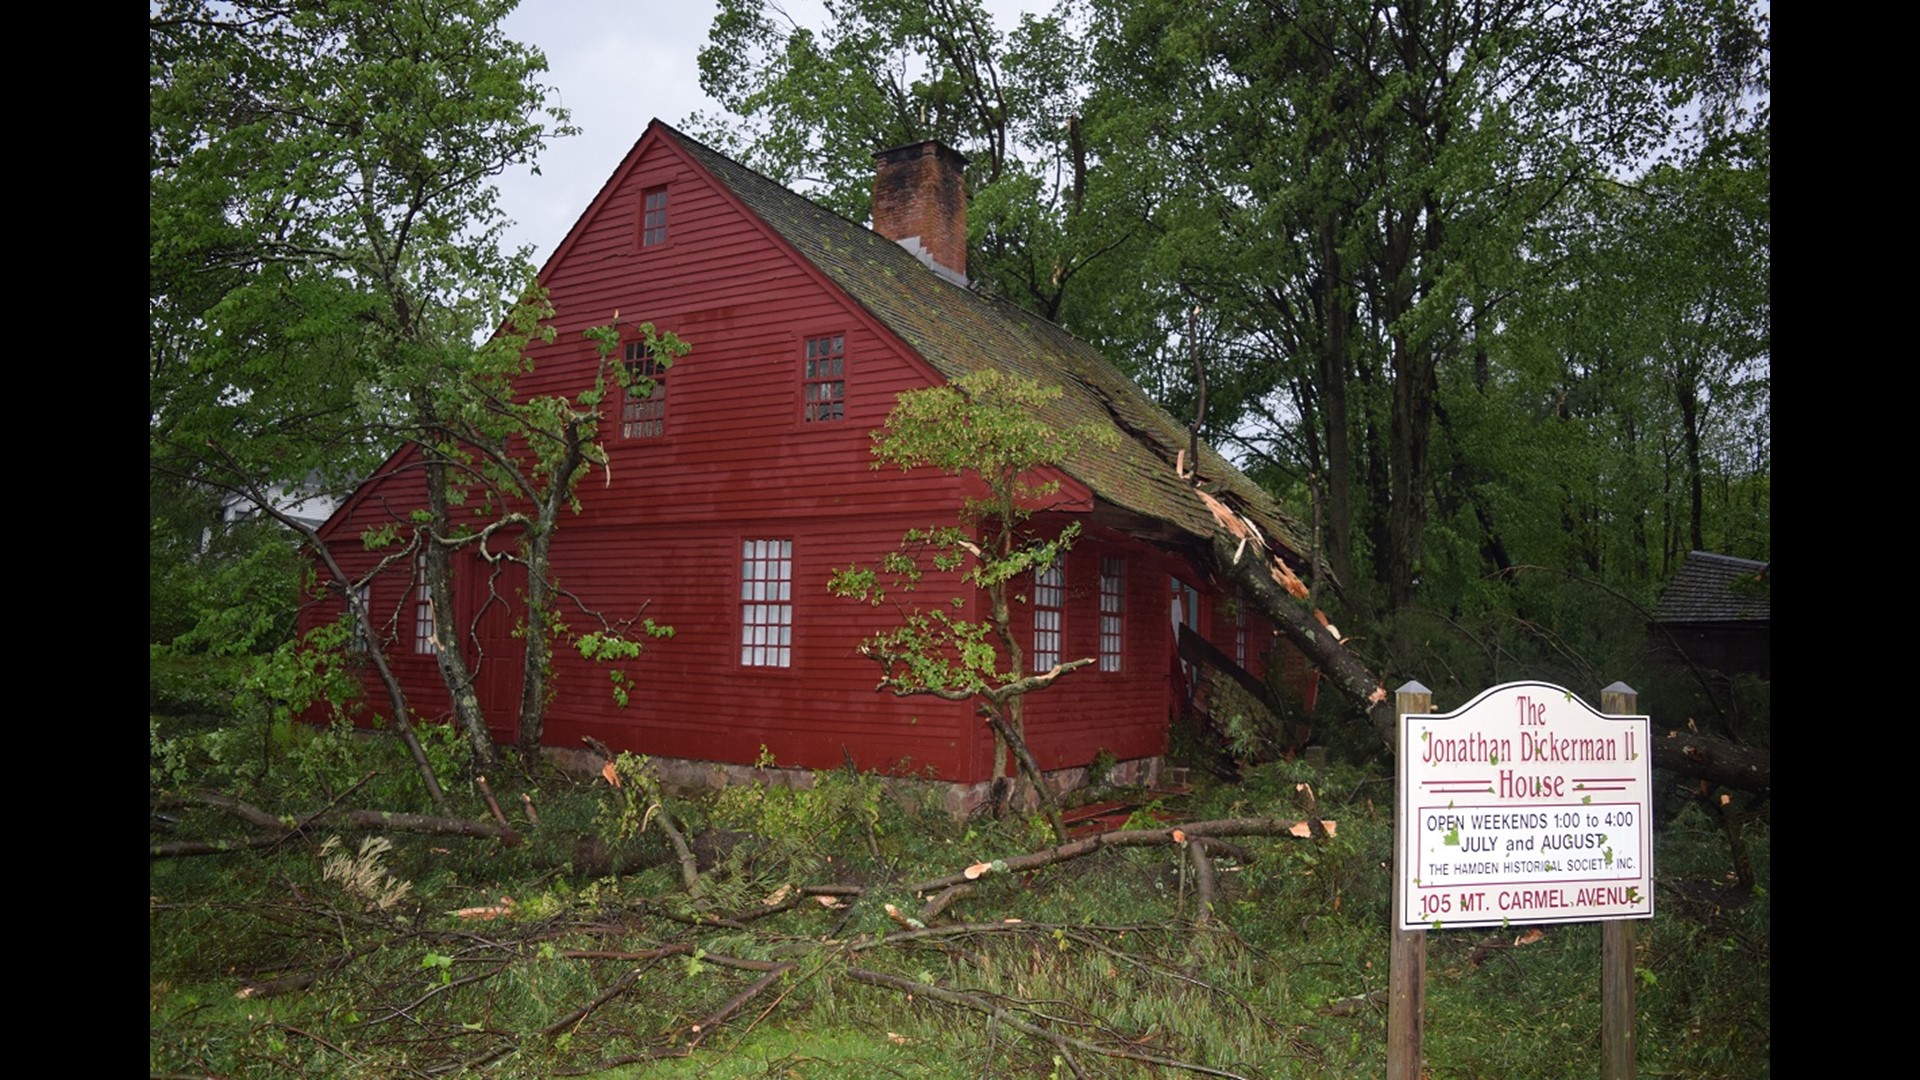 The house and adjoining barn were seriously damaged in the 2018 Hamden tornado